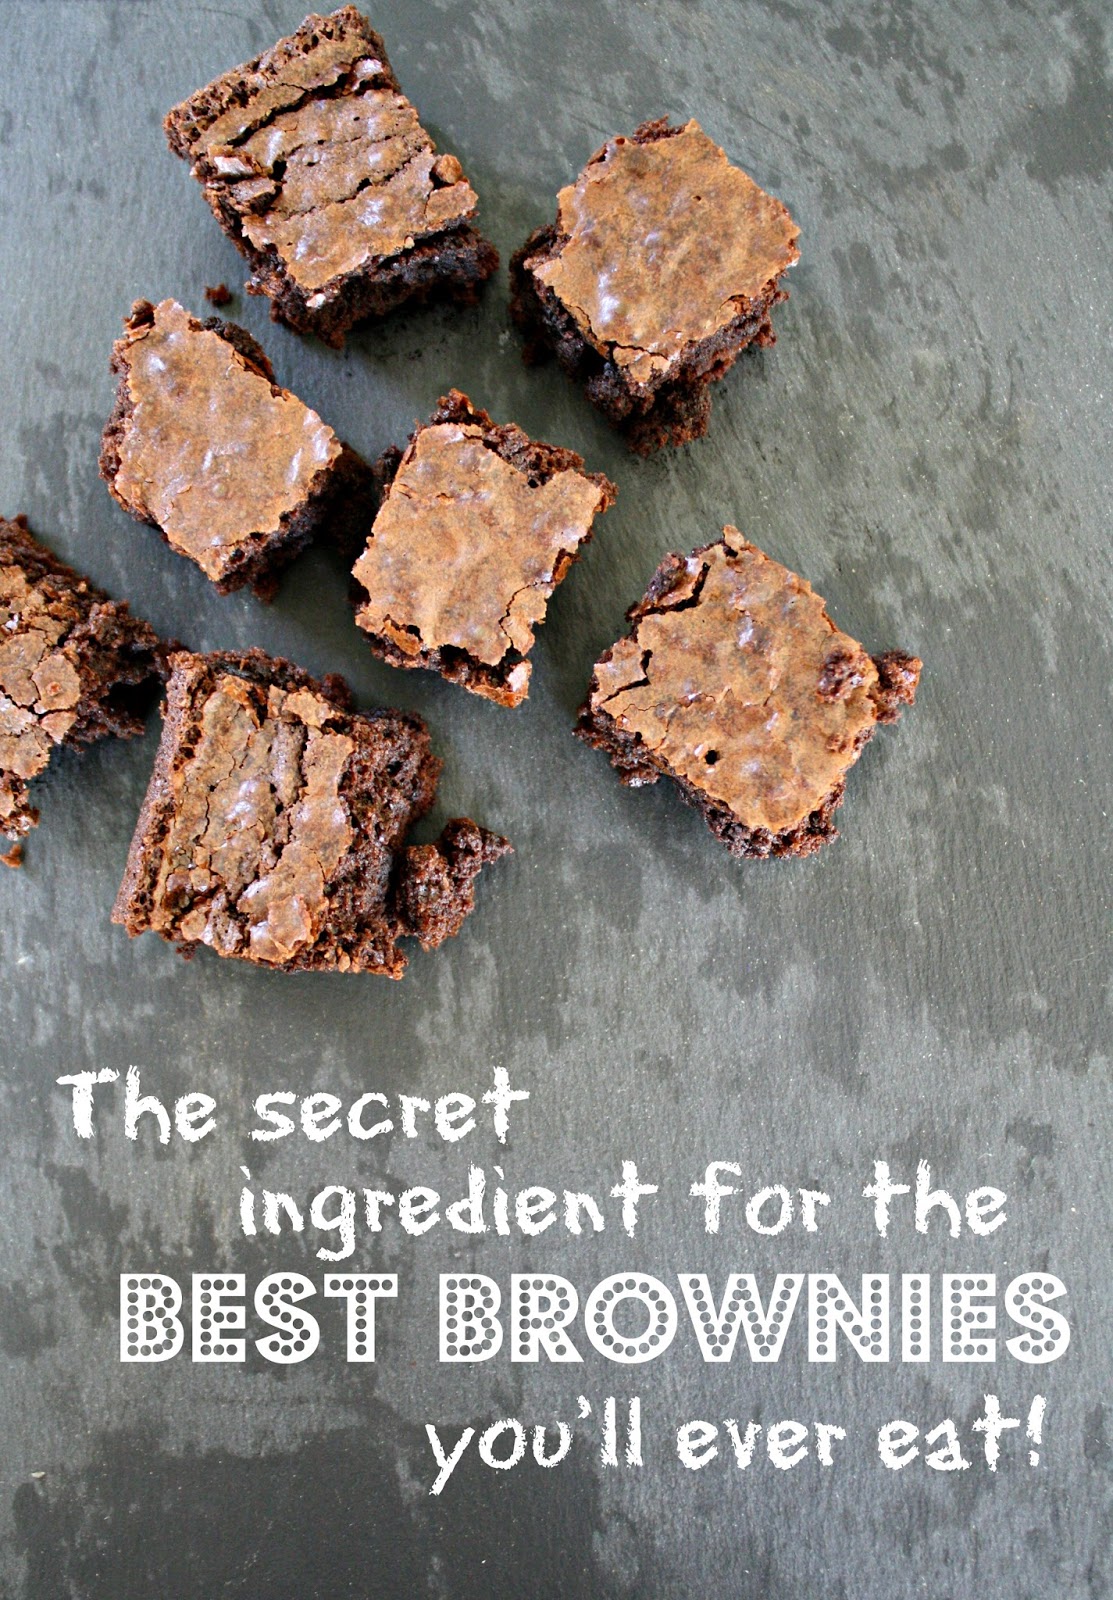 Secret ingredient for DELICIOUS box brownies